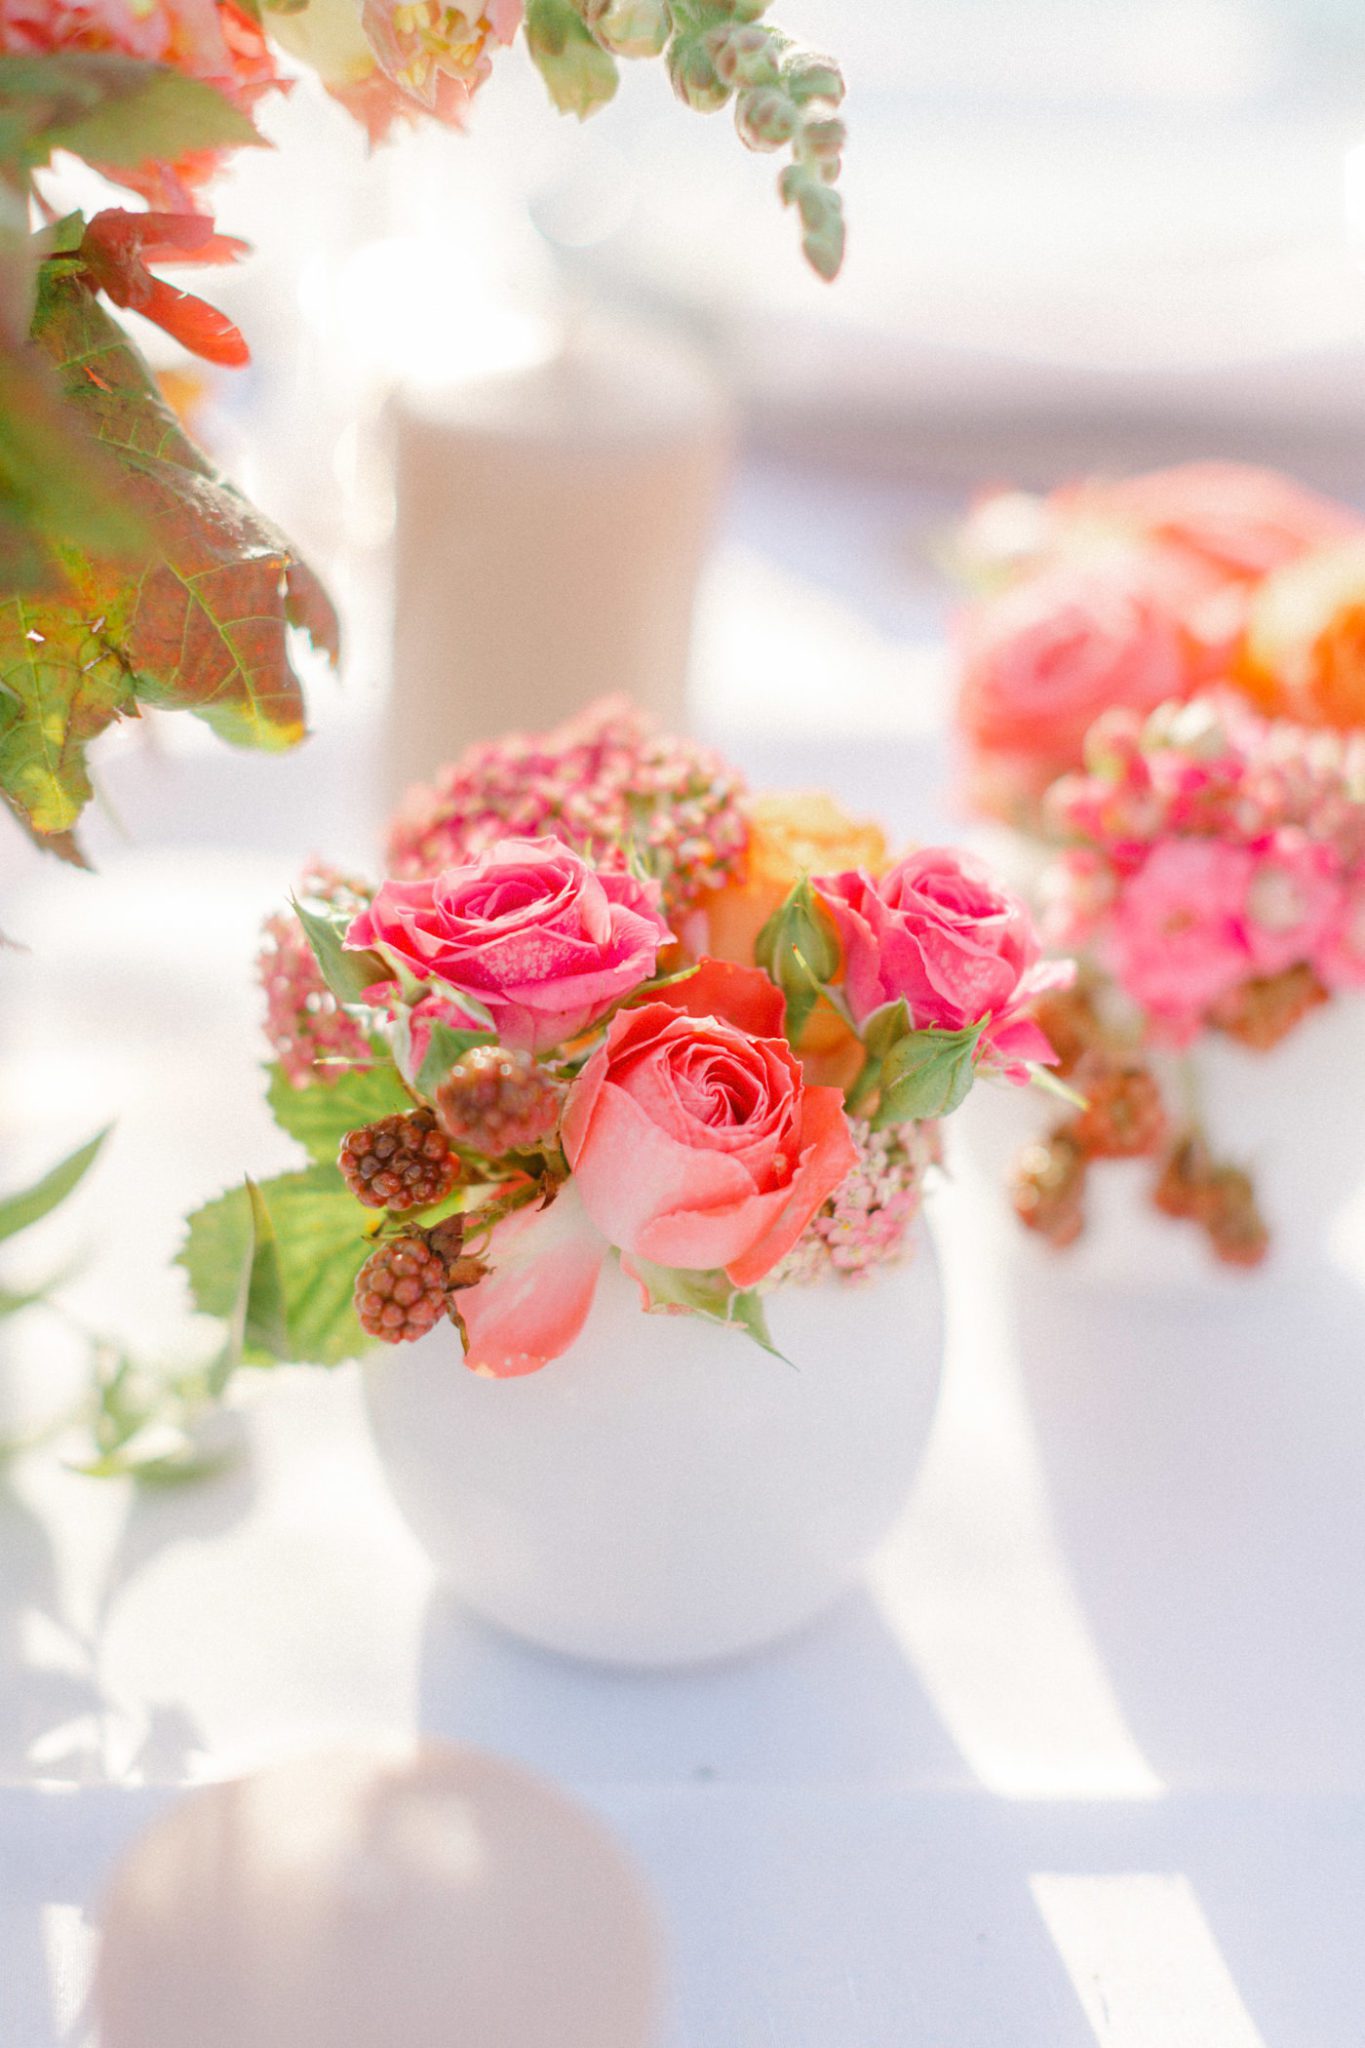 Pink, orange and red vibrant florals for your wedding centrepieces